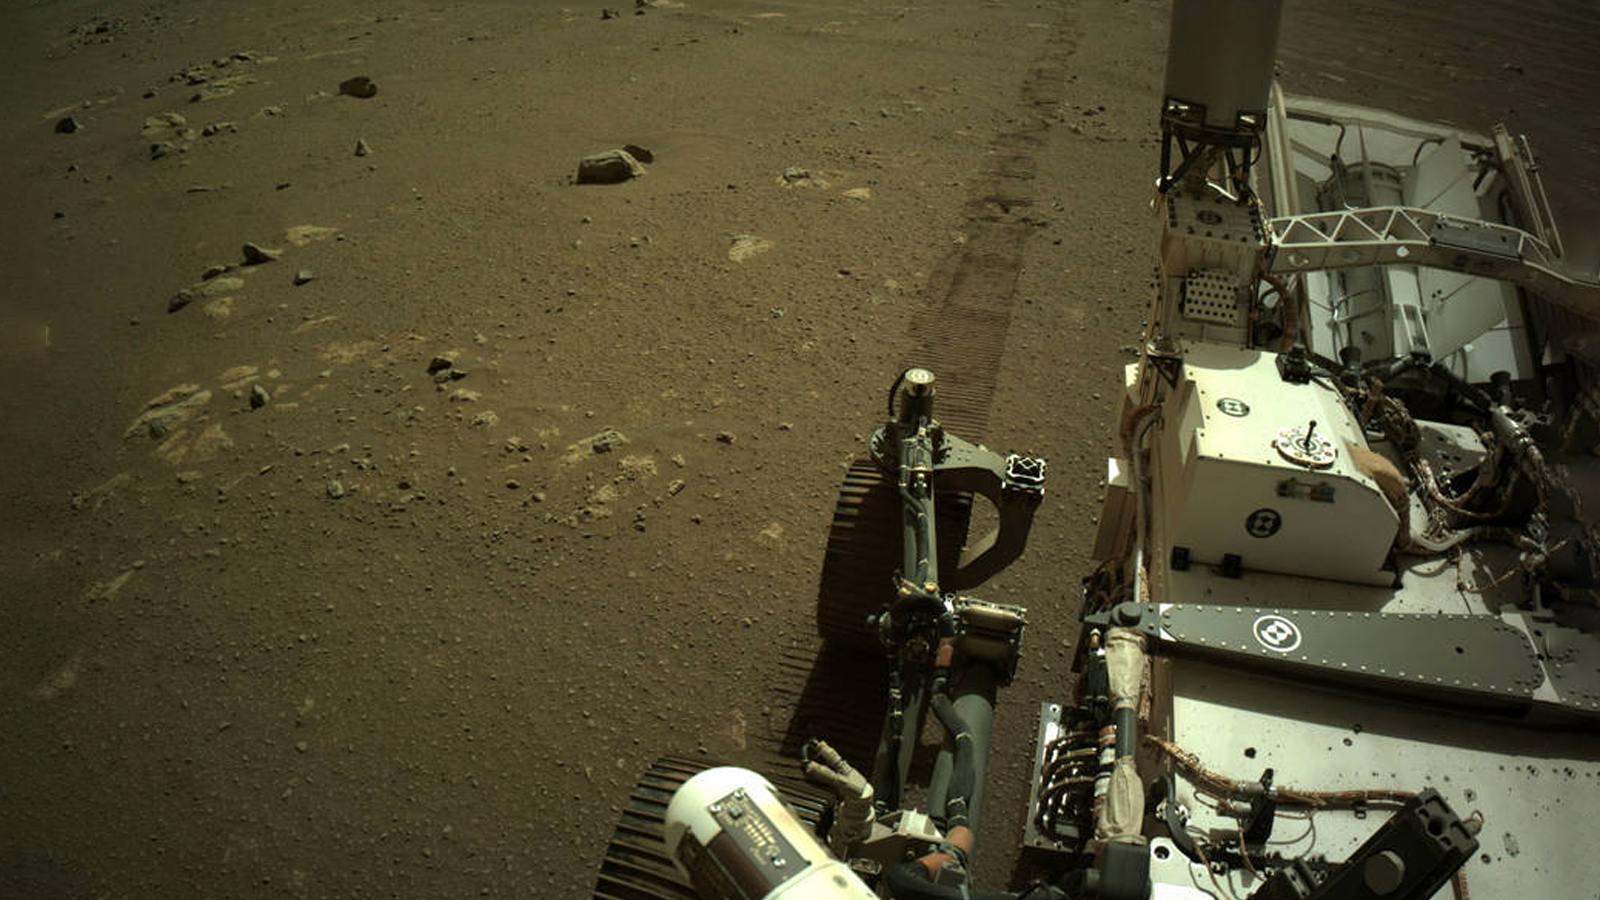 Hear the Perseverance Rover Drive Across Mars In These NASA Recordings